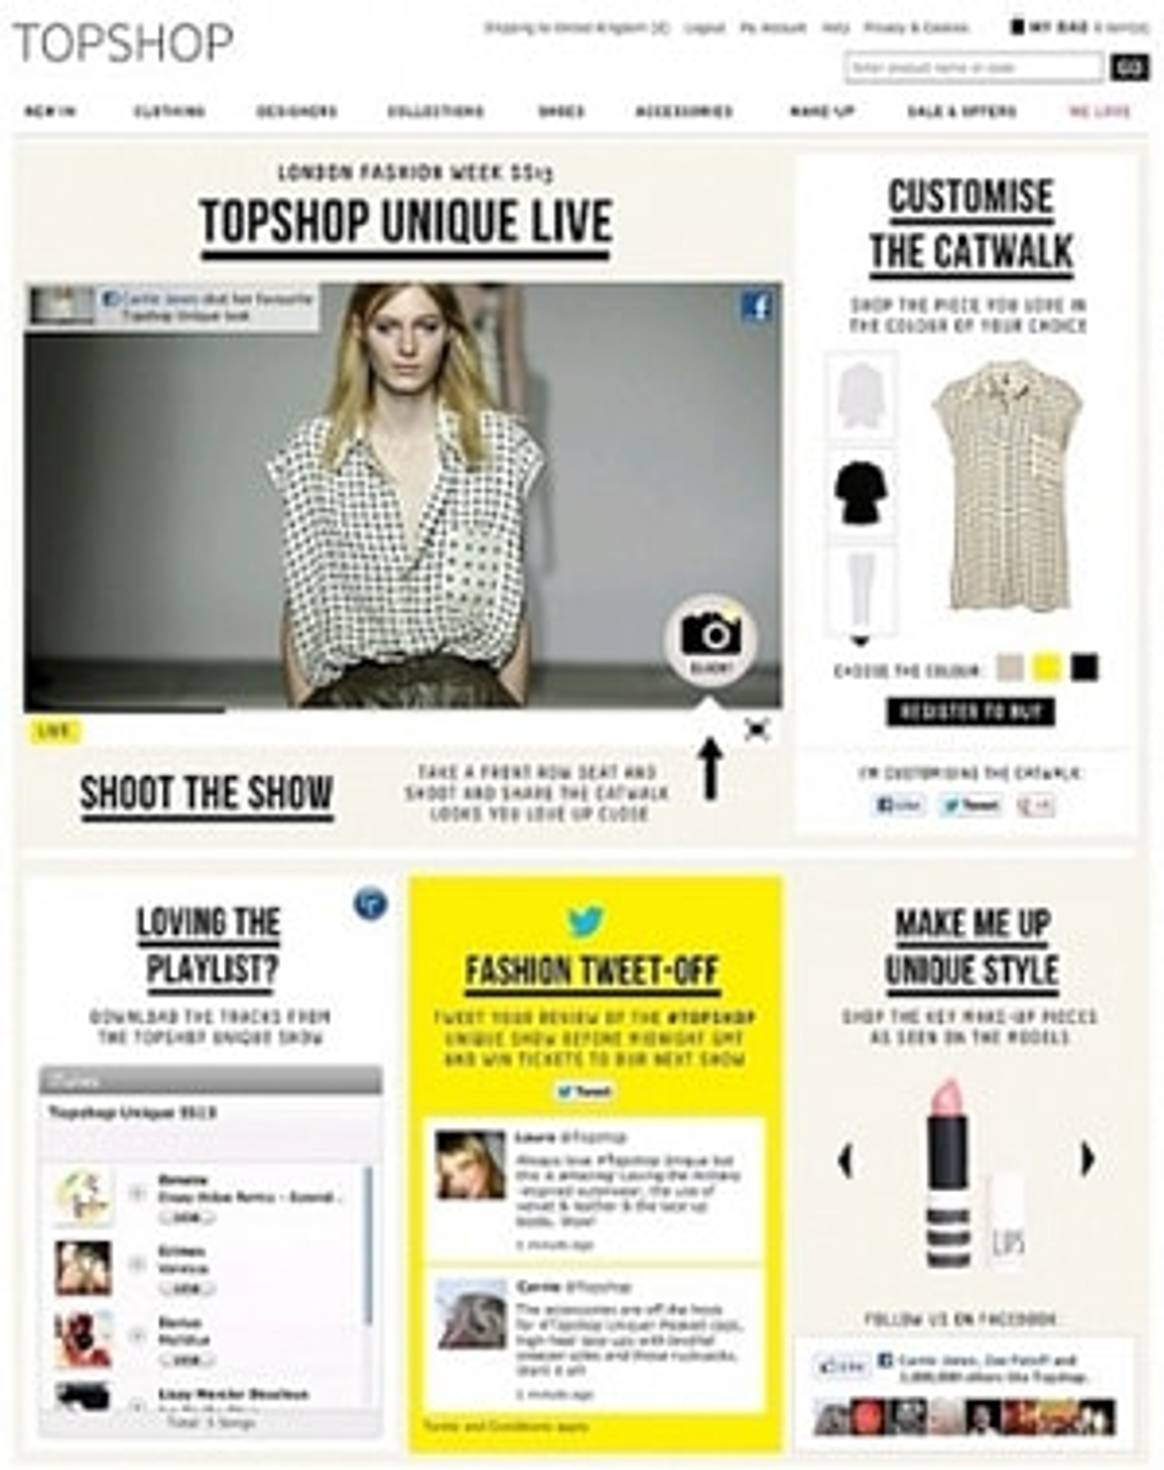 Topshop partners with Facebook ahead of LFW